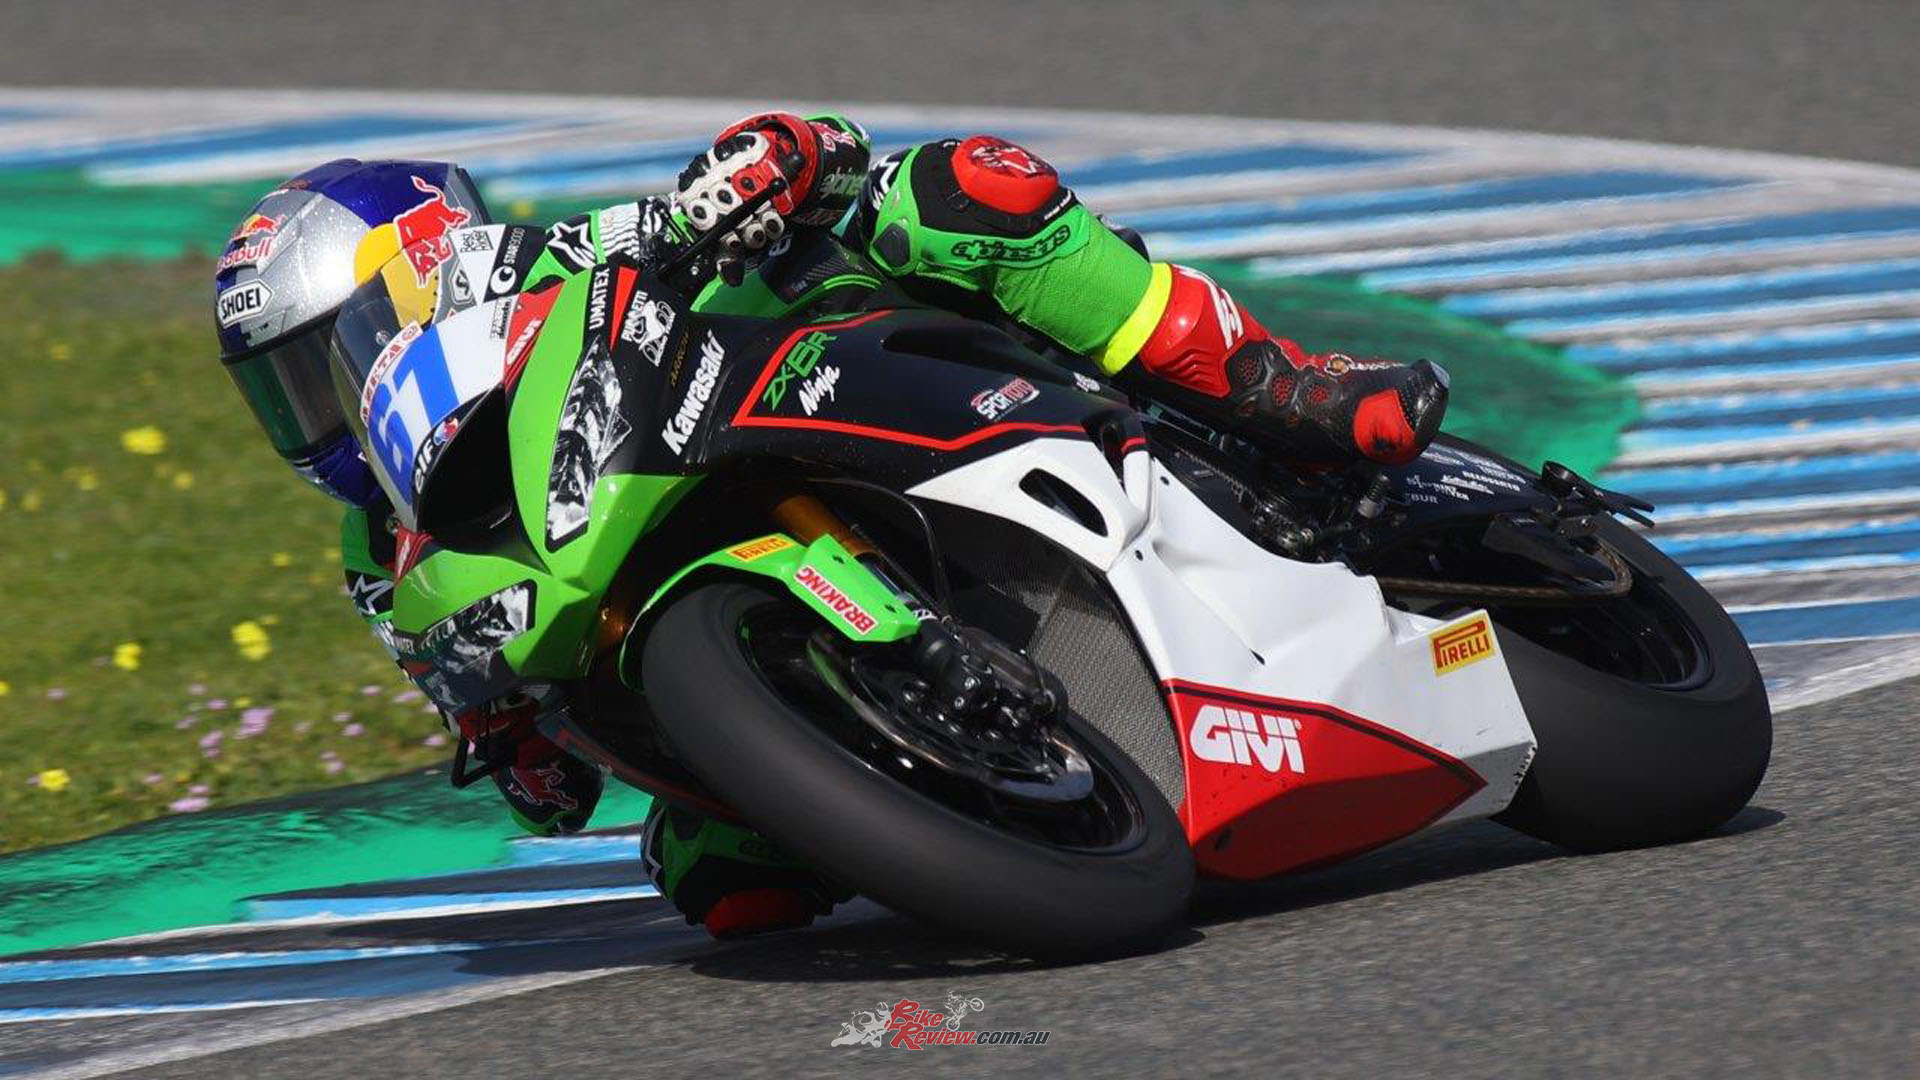 A new ruleset has brought plenty of changes to the WorldSSP grid for 2022 but 30 riders will battle it out for glory in the upcoming campaign.